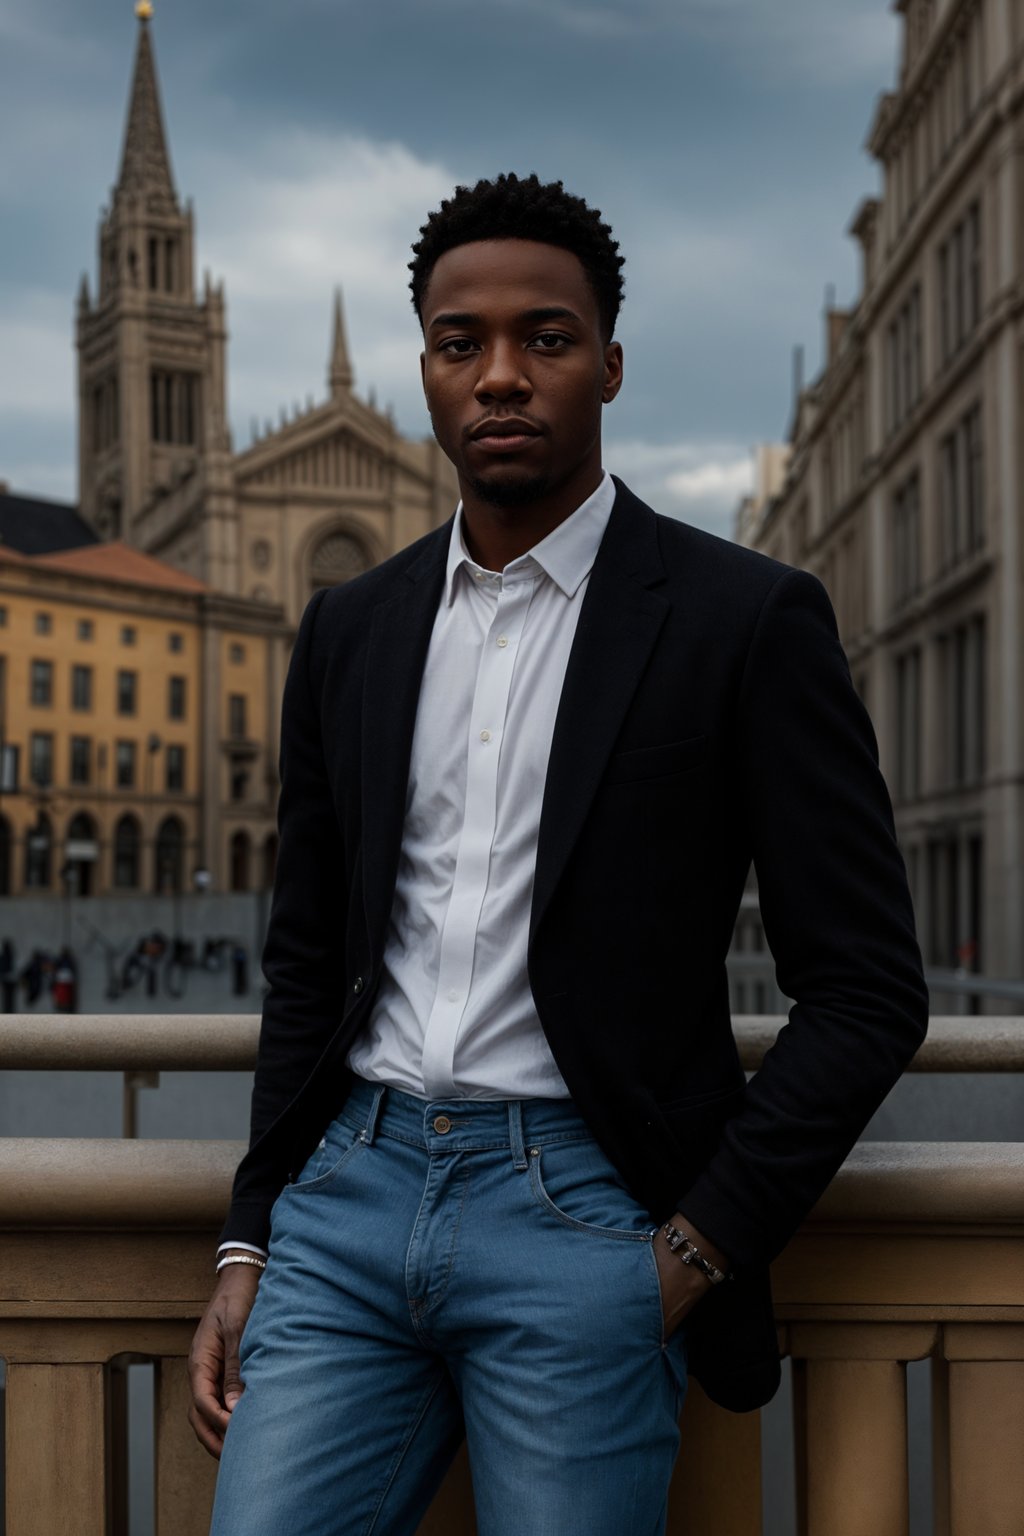 sharp and trendy man in Milan wearing a fashionable blazer and jeans, Duomo di Milano in the background